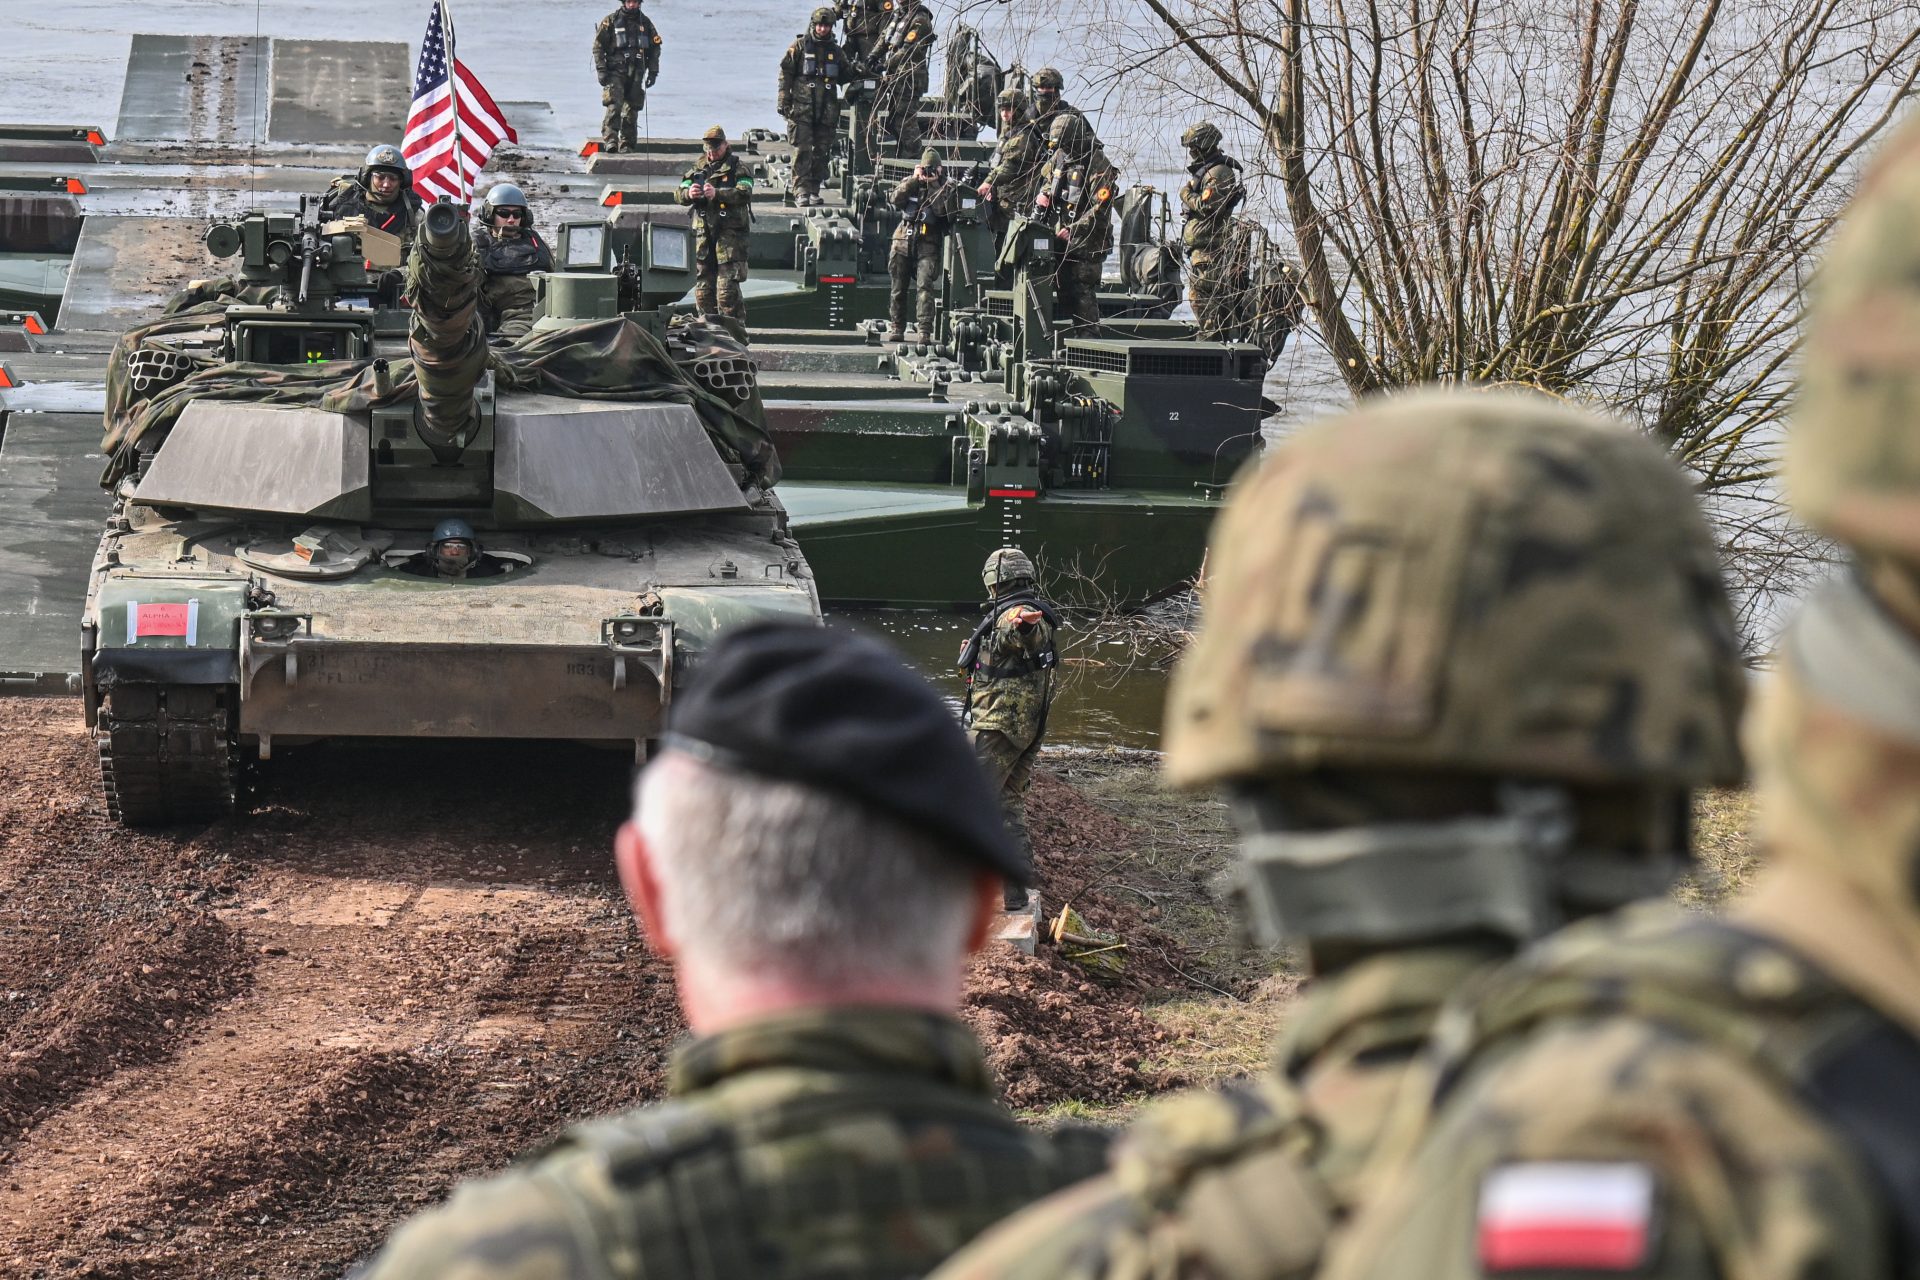 The U.S. is moving tanks and combat vehicles closer to Russia